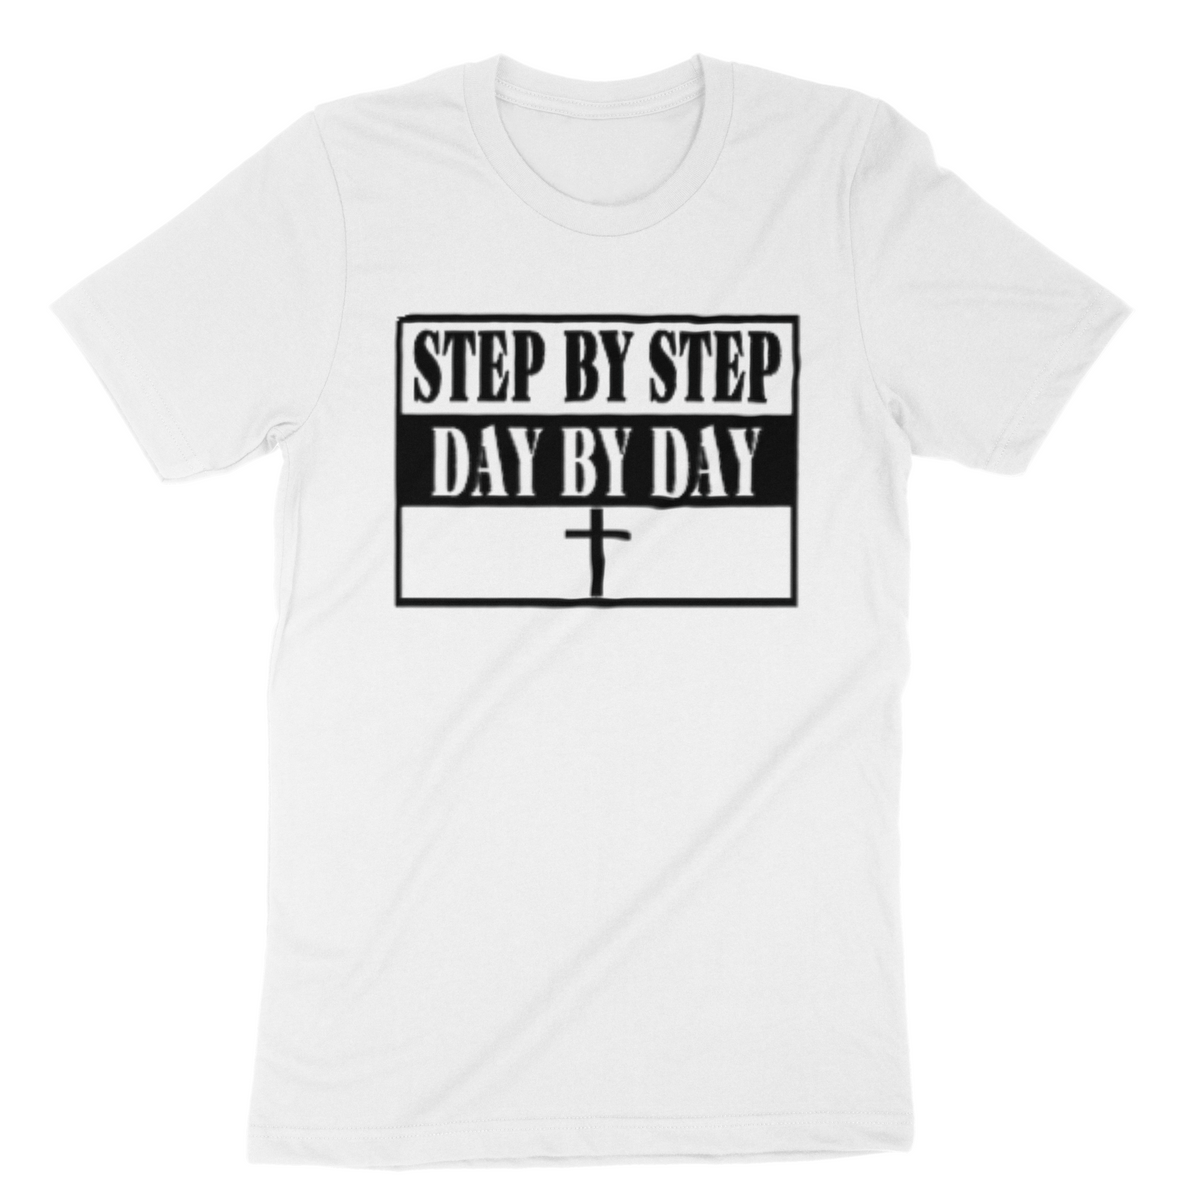 Step by step day by day tshirt